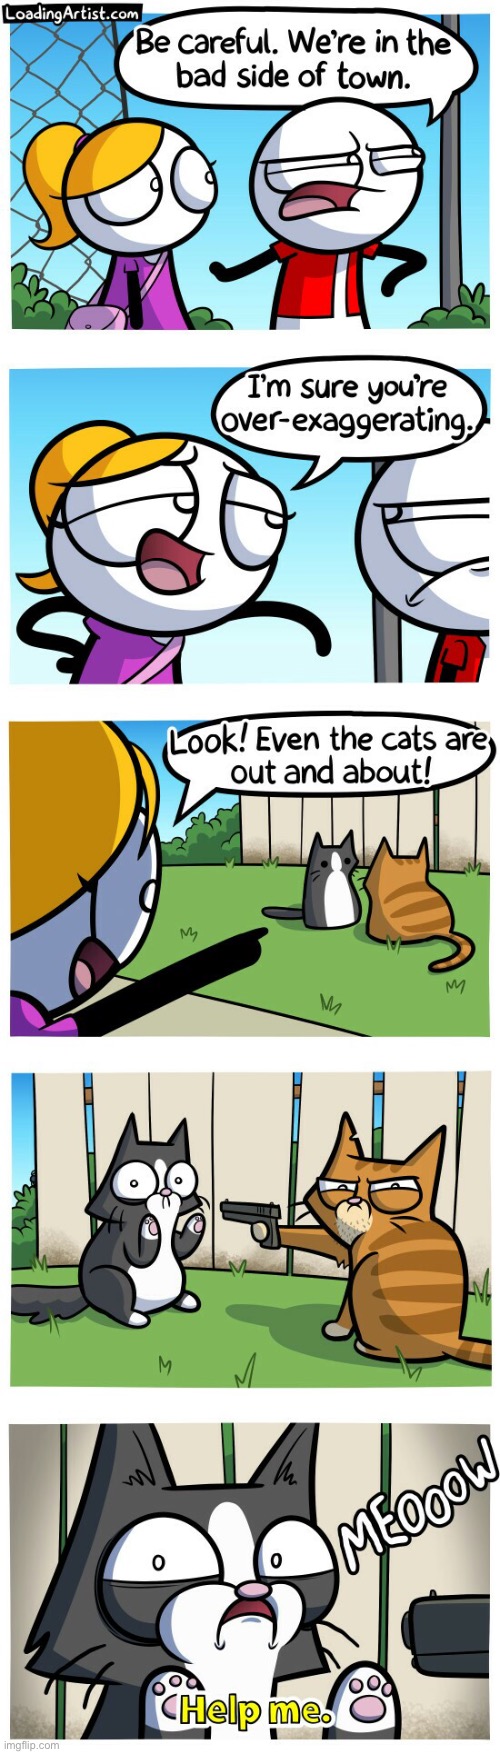 #1,203 | image tagged in loading,artist,comics,comics/cartoons,cats,town | made w/ Imgflip meme maker